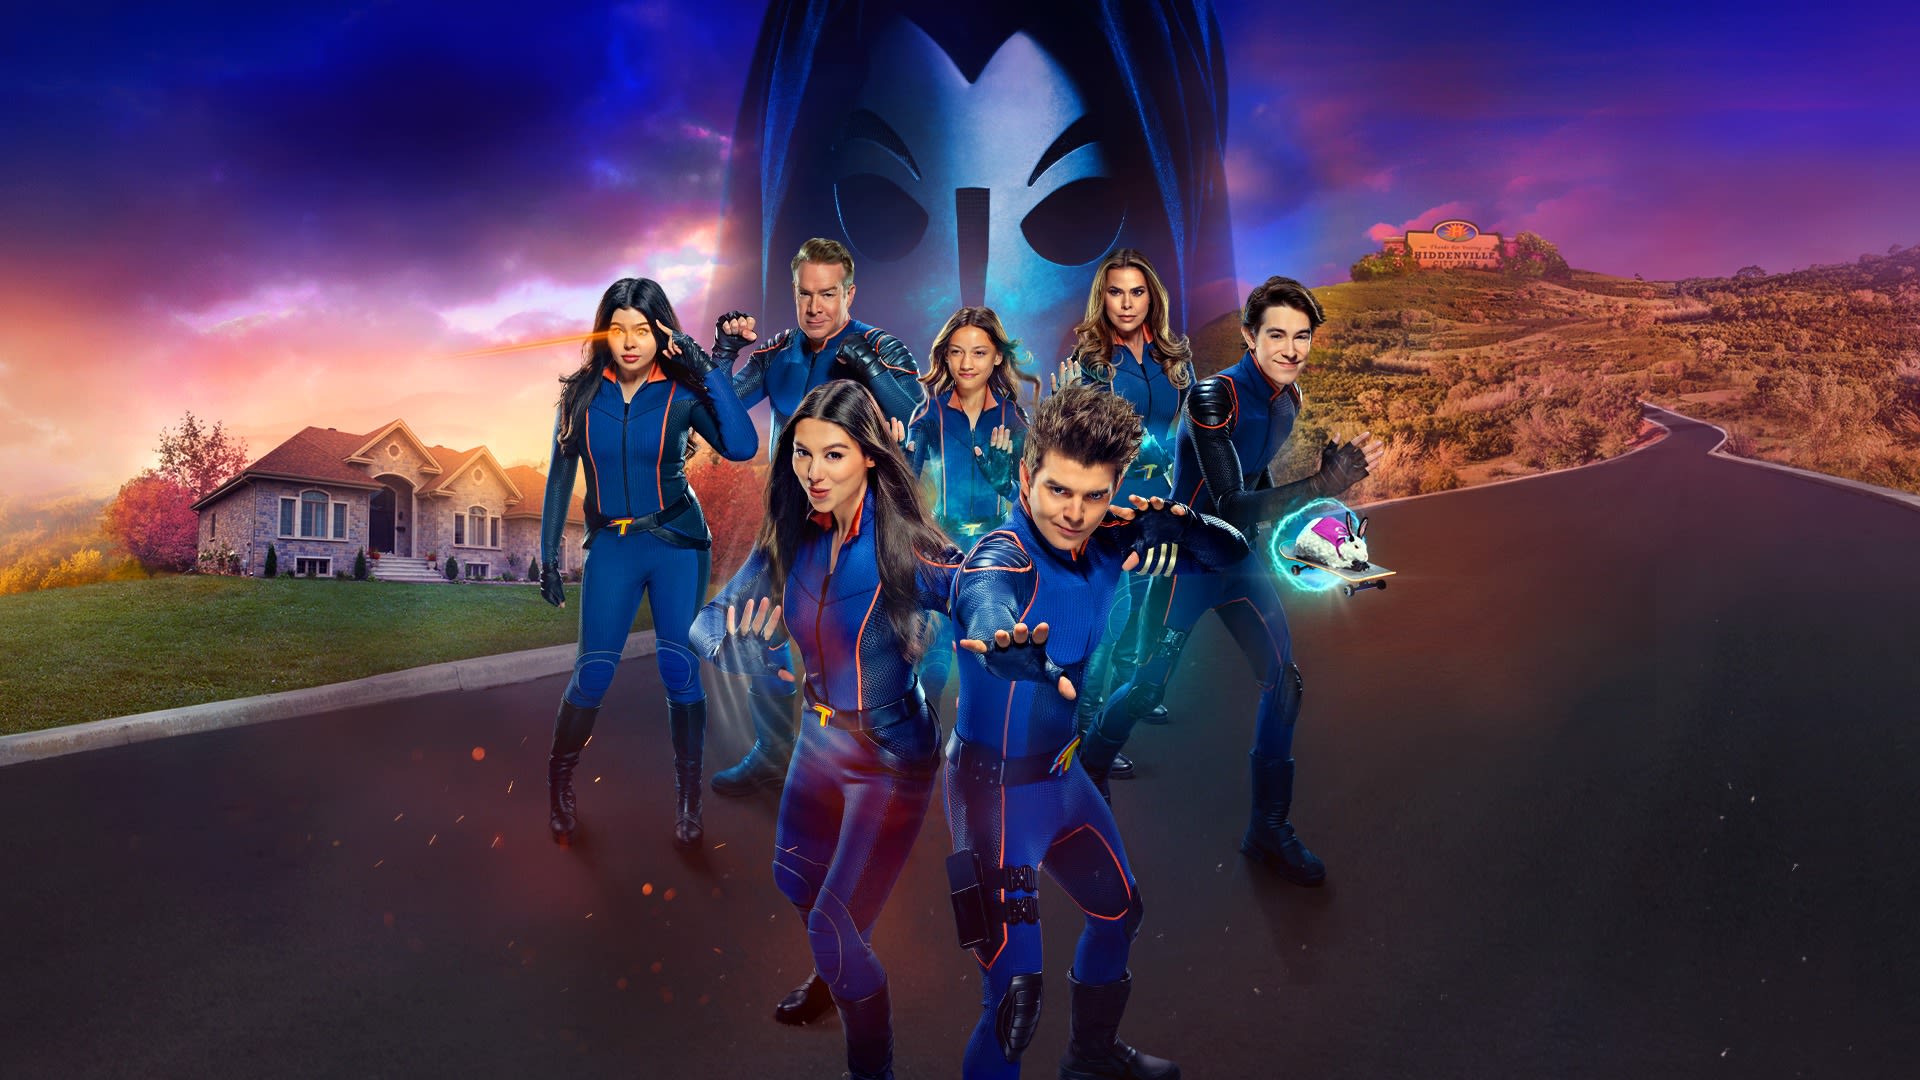 The Thundermans Return: Nickelodeon Orders Spin-Off Series with Original Cast Members